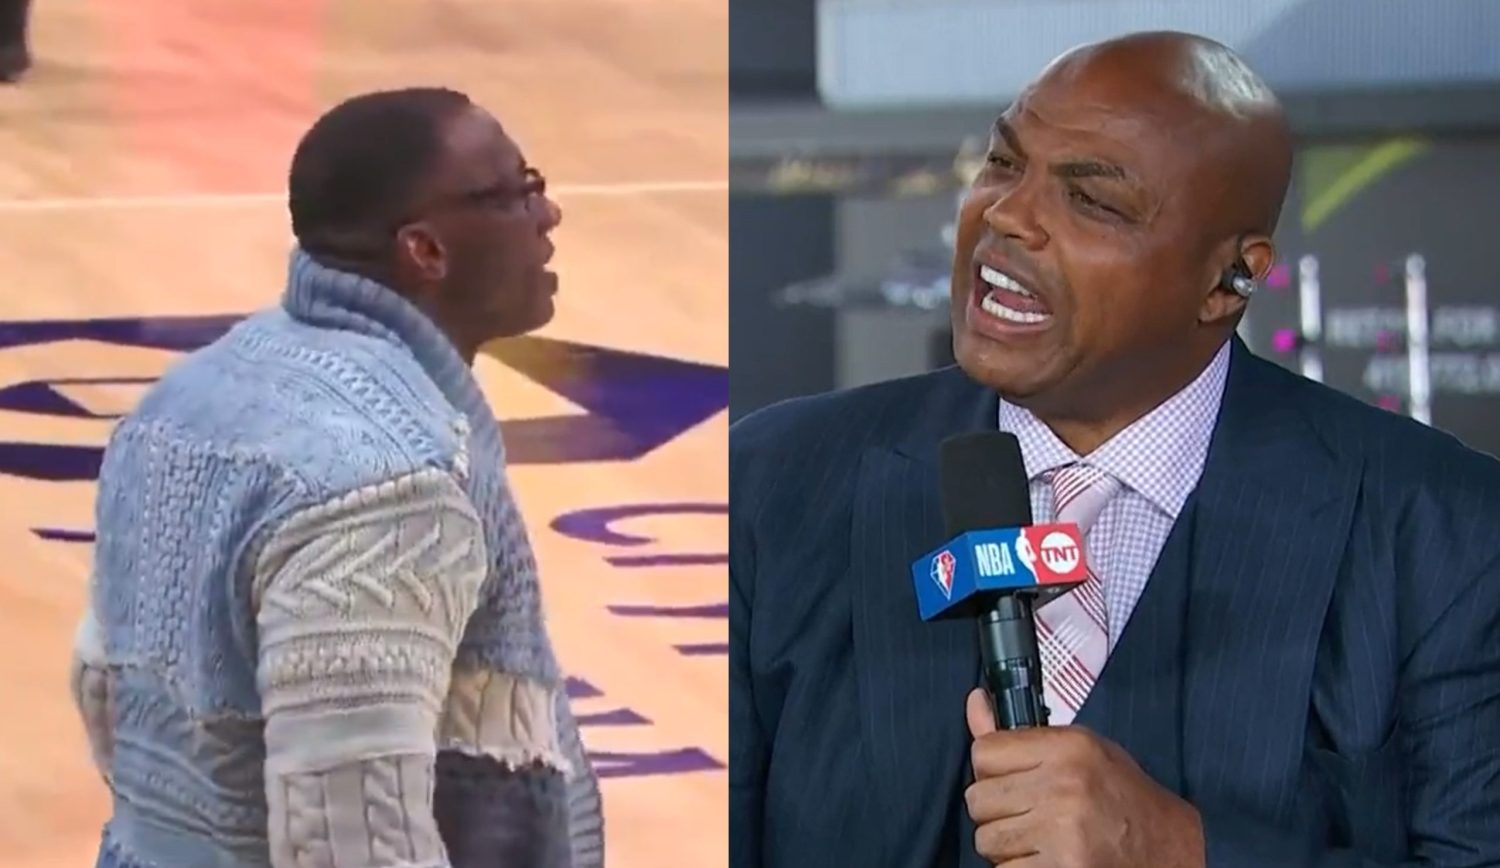 Charles Barkley weighs in on Shannon Sharpe altercation